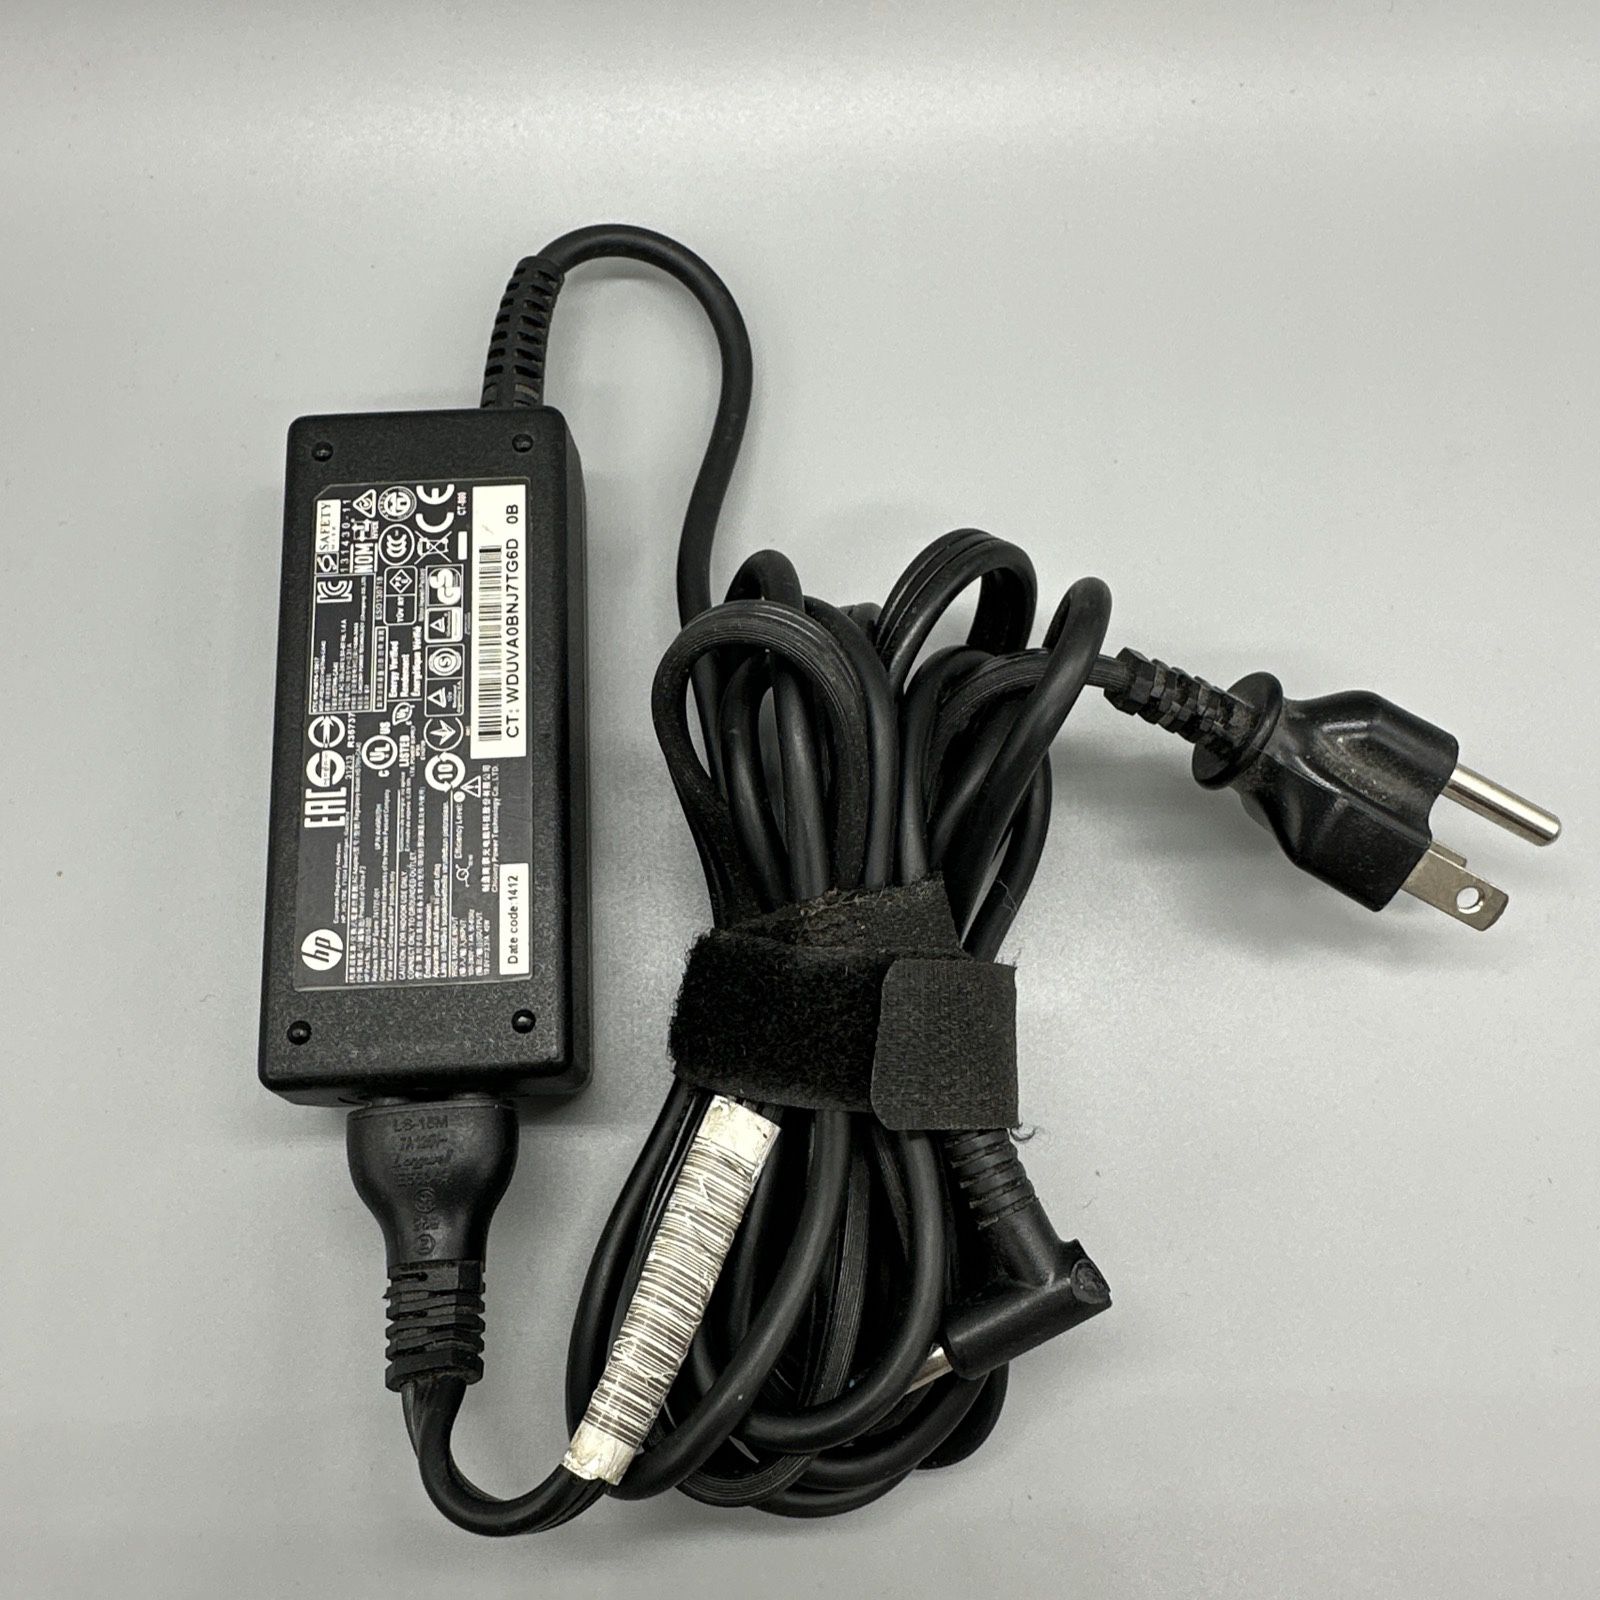 AC/DC Adapter for HP EAC 31213 R35737 NSW26097 Laptop Power Supply Mains